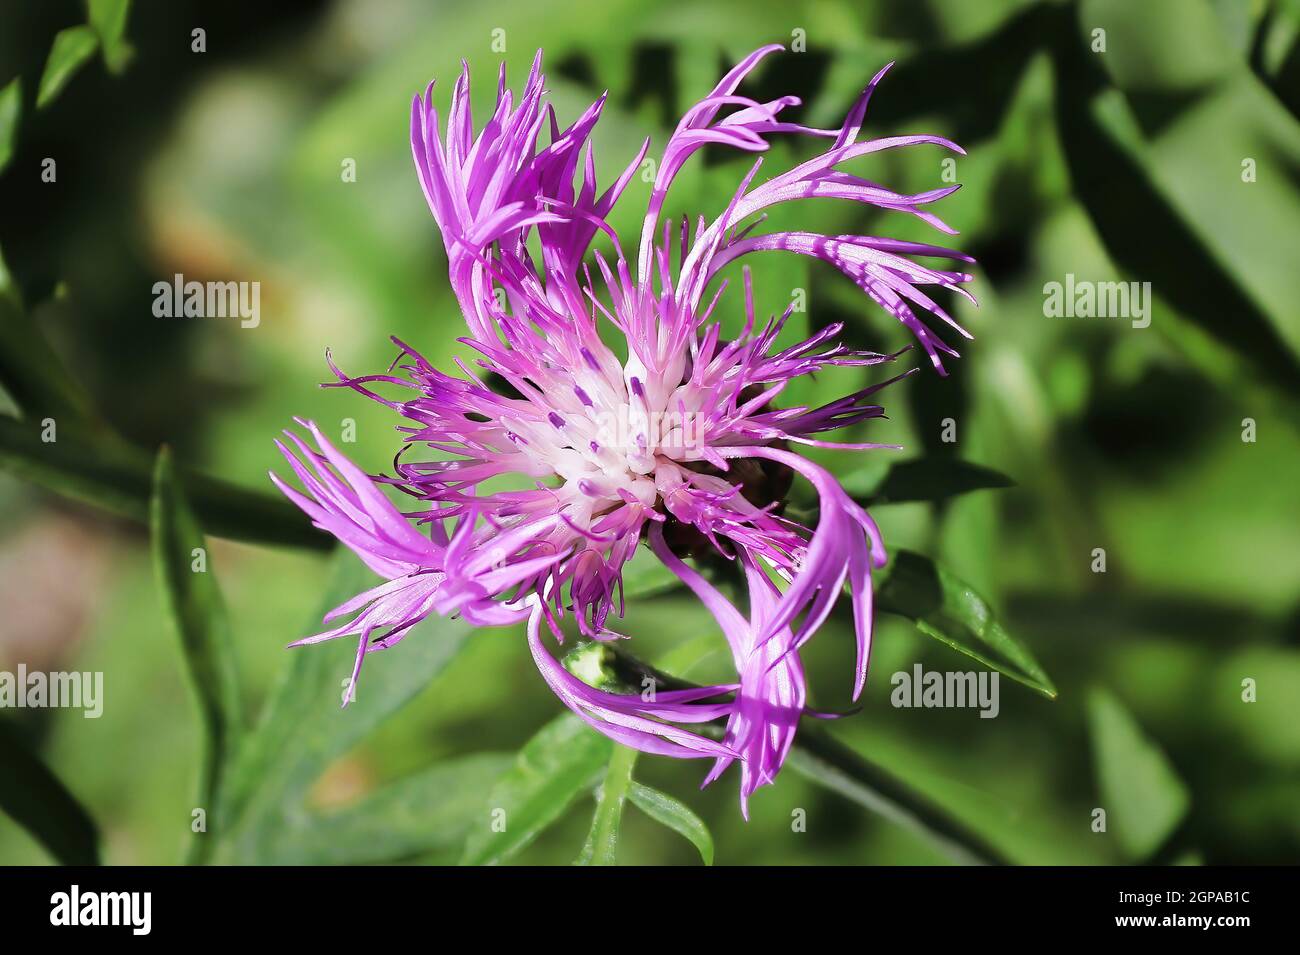 Spiraled pink petals on a knapweed flower. Stock Photo